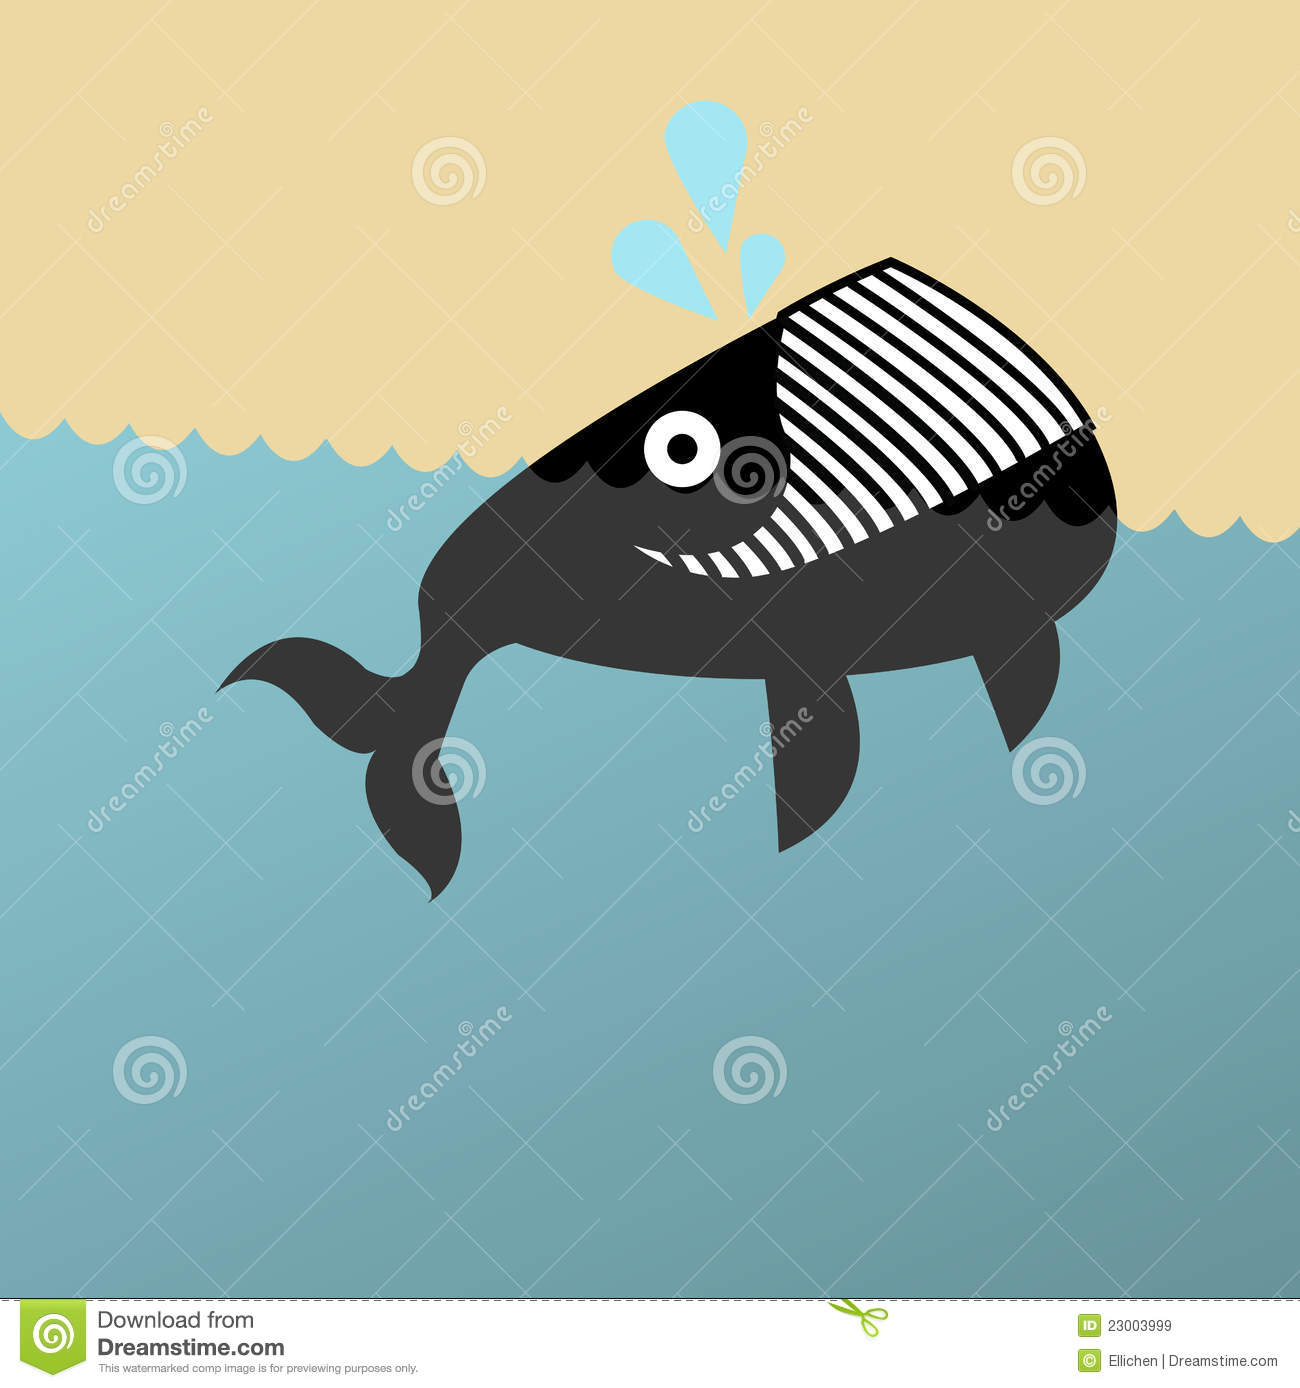 Illustration Of A Grinning Whale Royalty Free Stock Images   Image